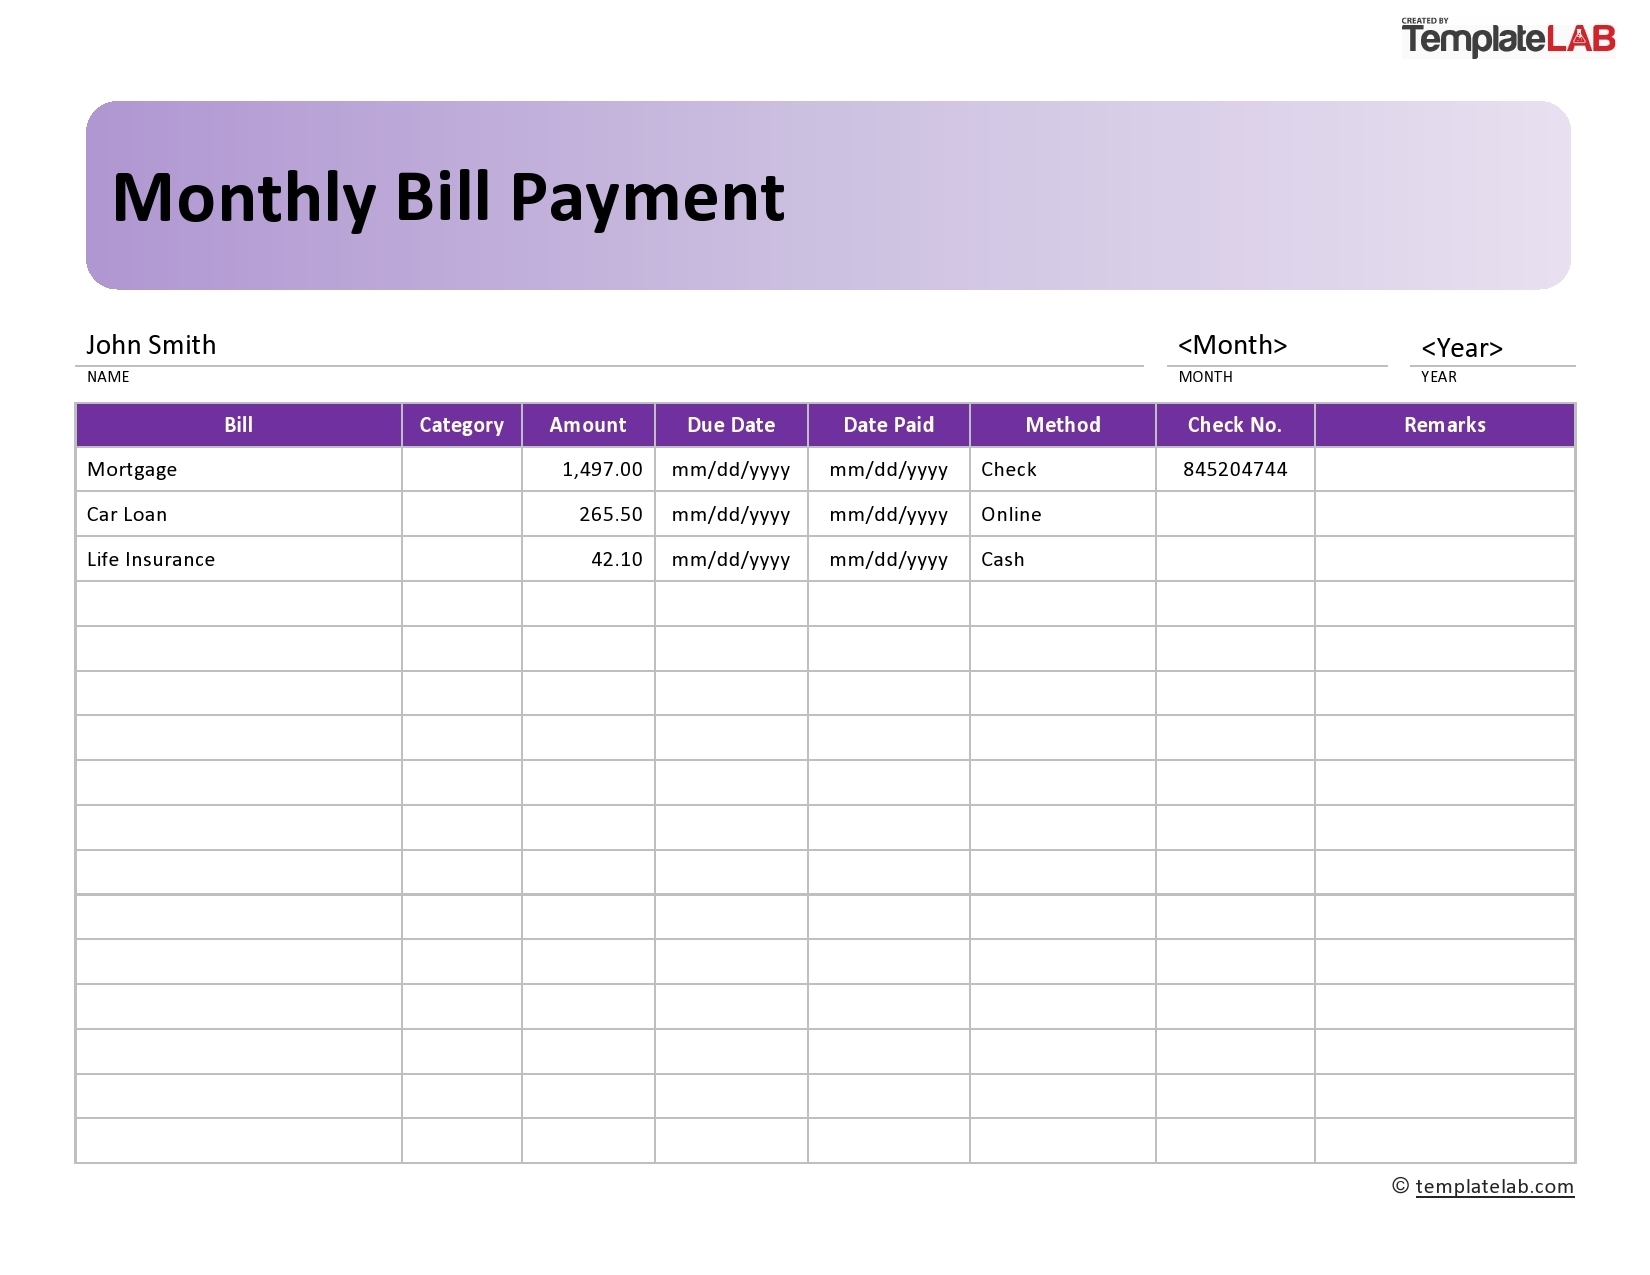 Pick Monthly Bill Payment Log